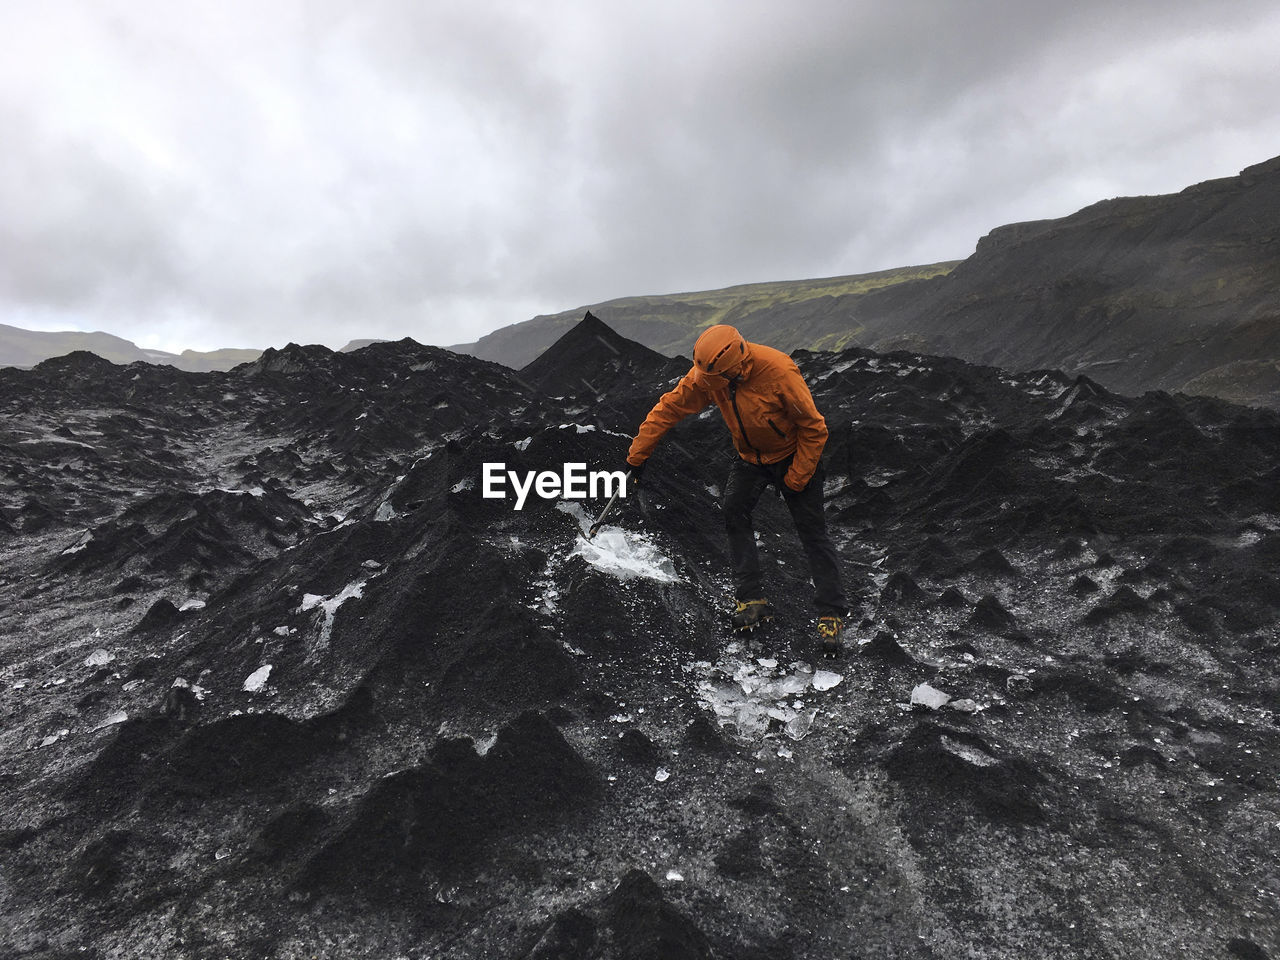 Man breaking ice on mountain against cloudy sky